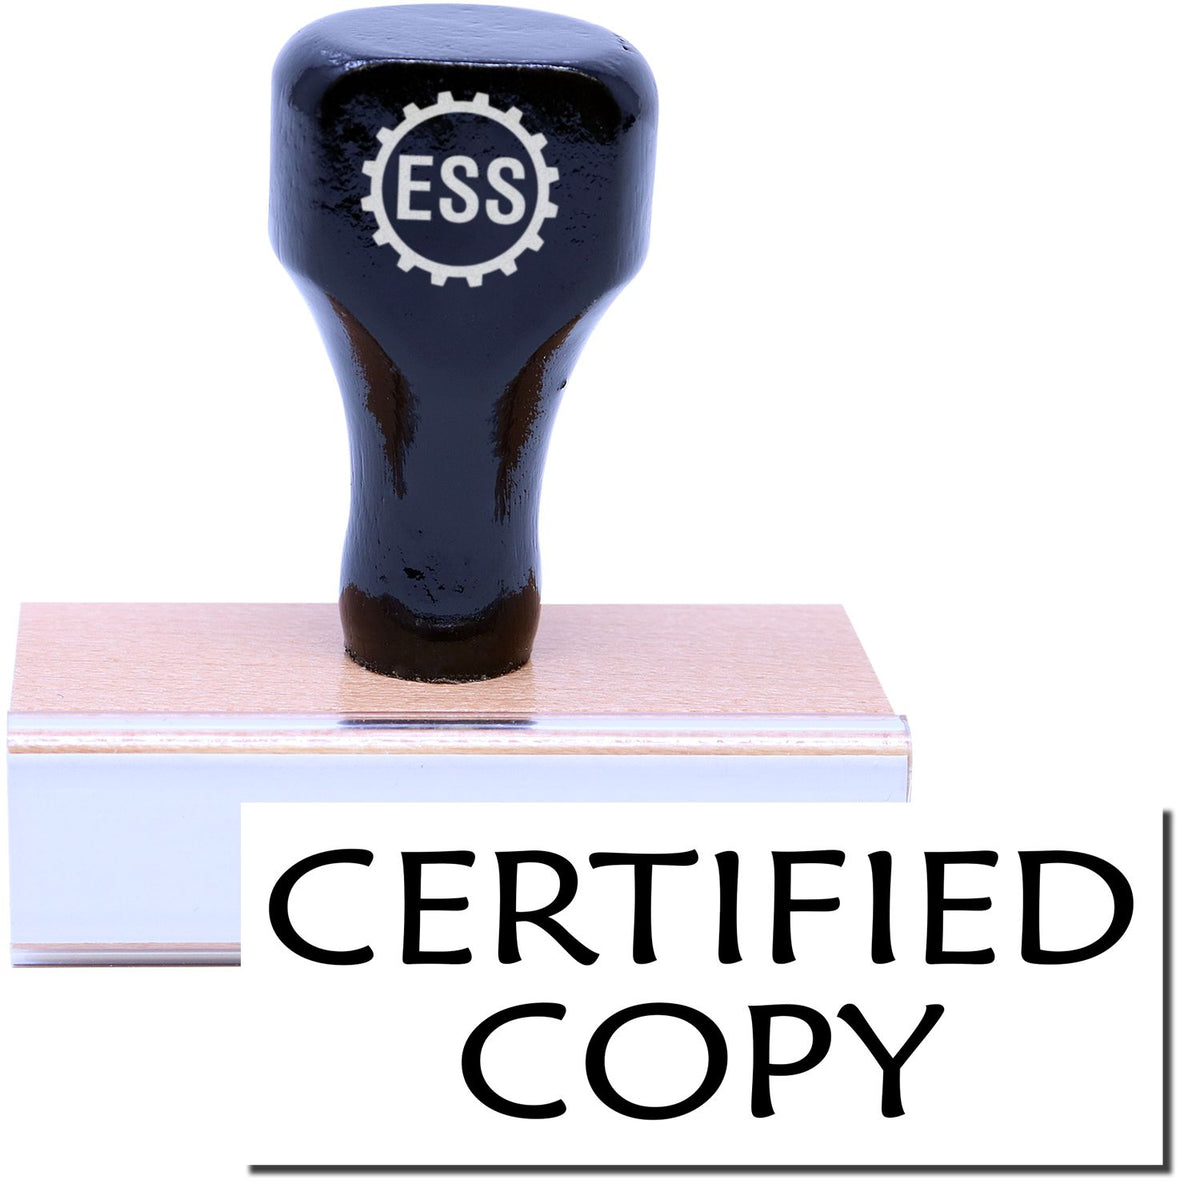 A stock office rubber stamp with a stamped image showing how the text &quot;CERTIFIED COPY&quot; in a large font is displayed after stamping.